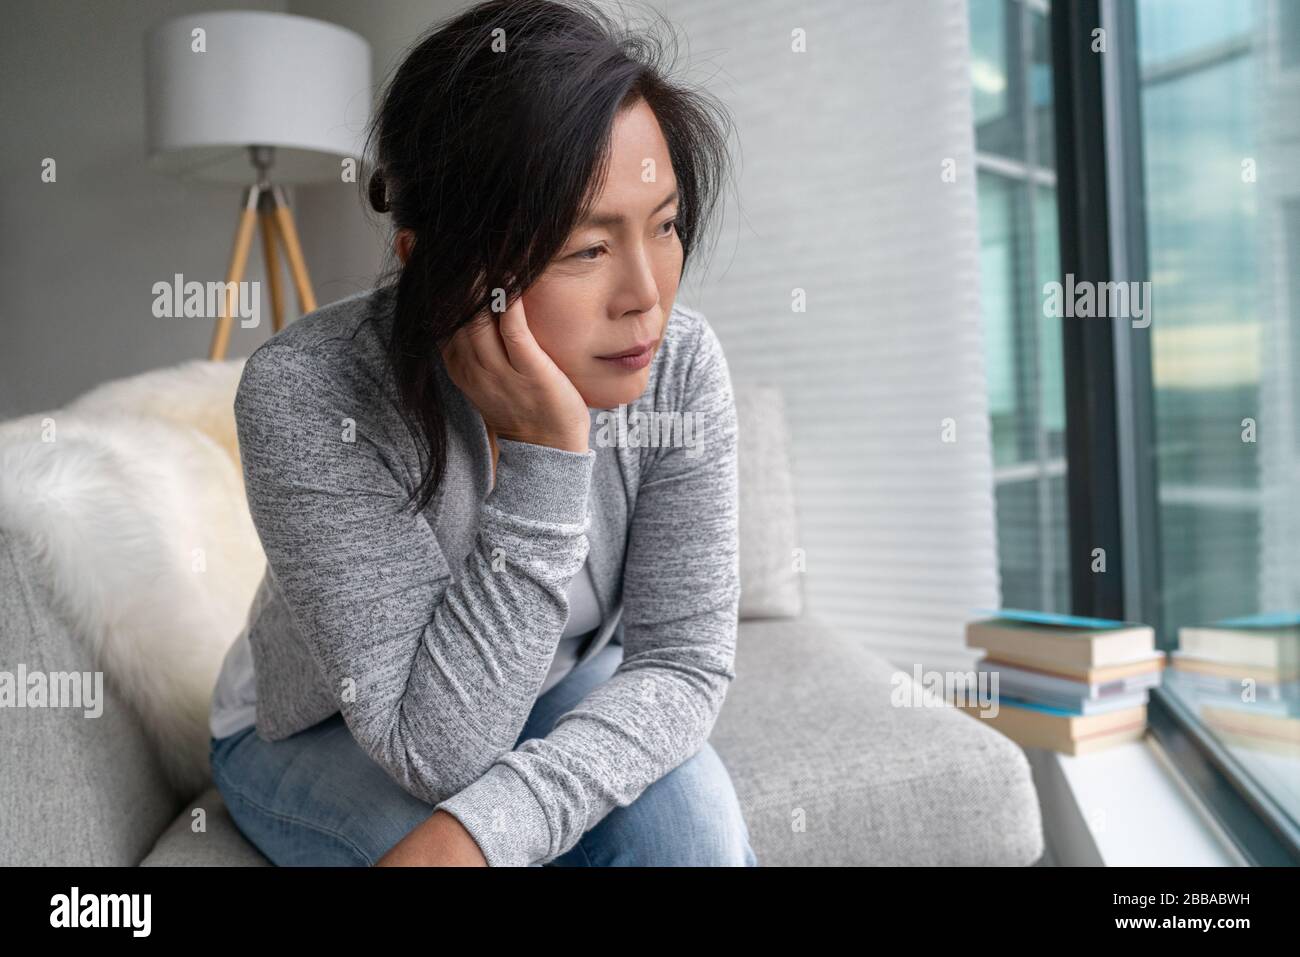 Sad Asian mature woman lonely at home self isolation quarantine for COVID-19 Coronavirus social distancing prevention. Mental health, anxiety depressed thinking senior chinese lady. Stock Photo